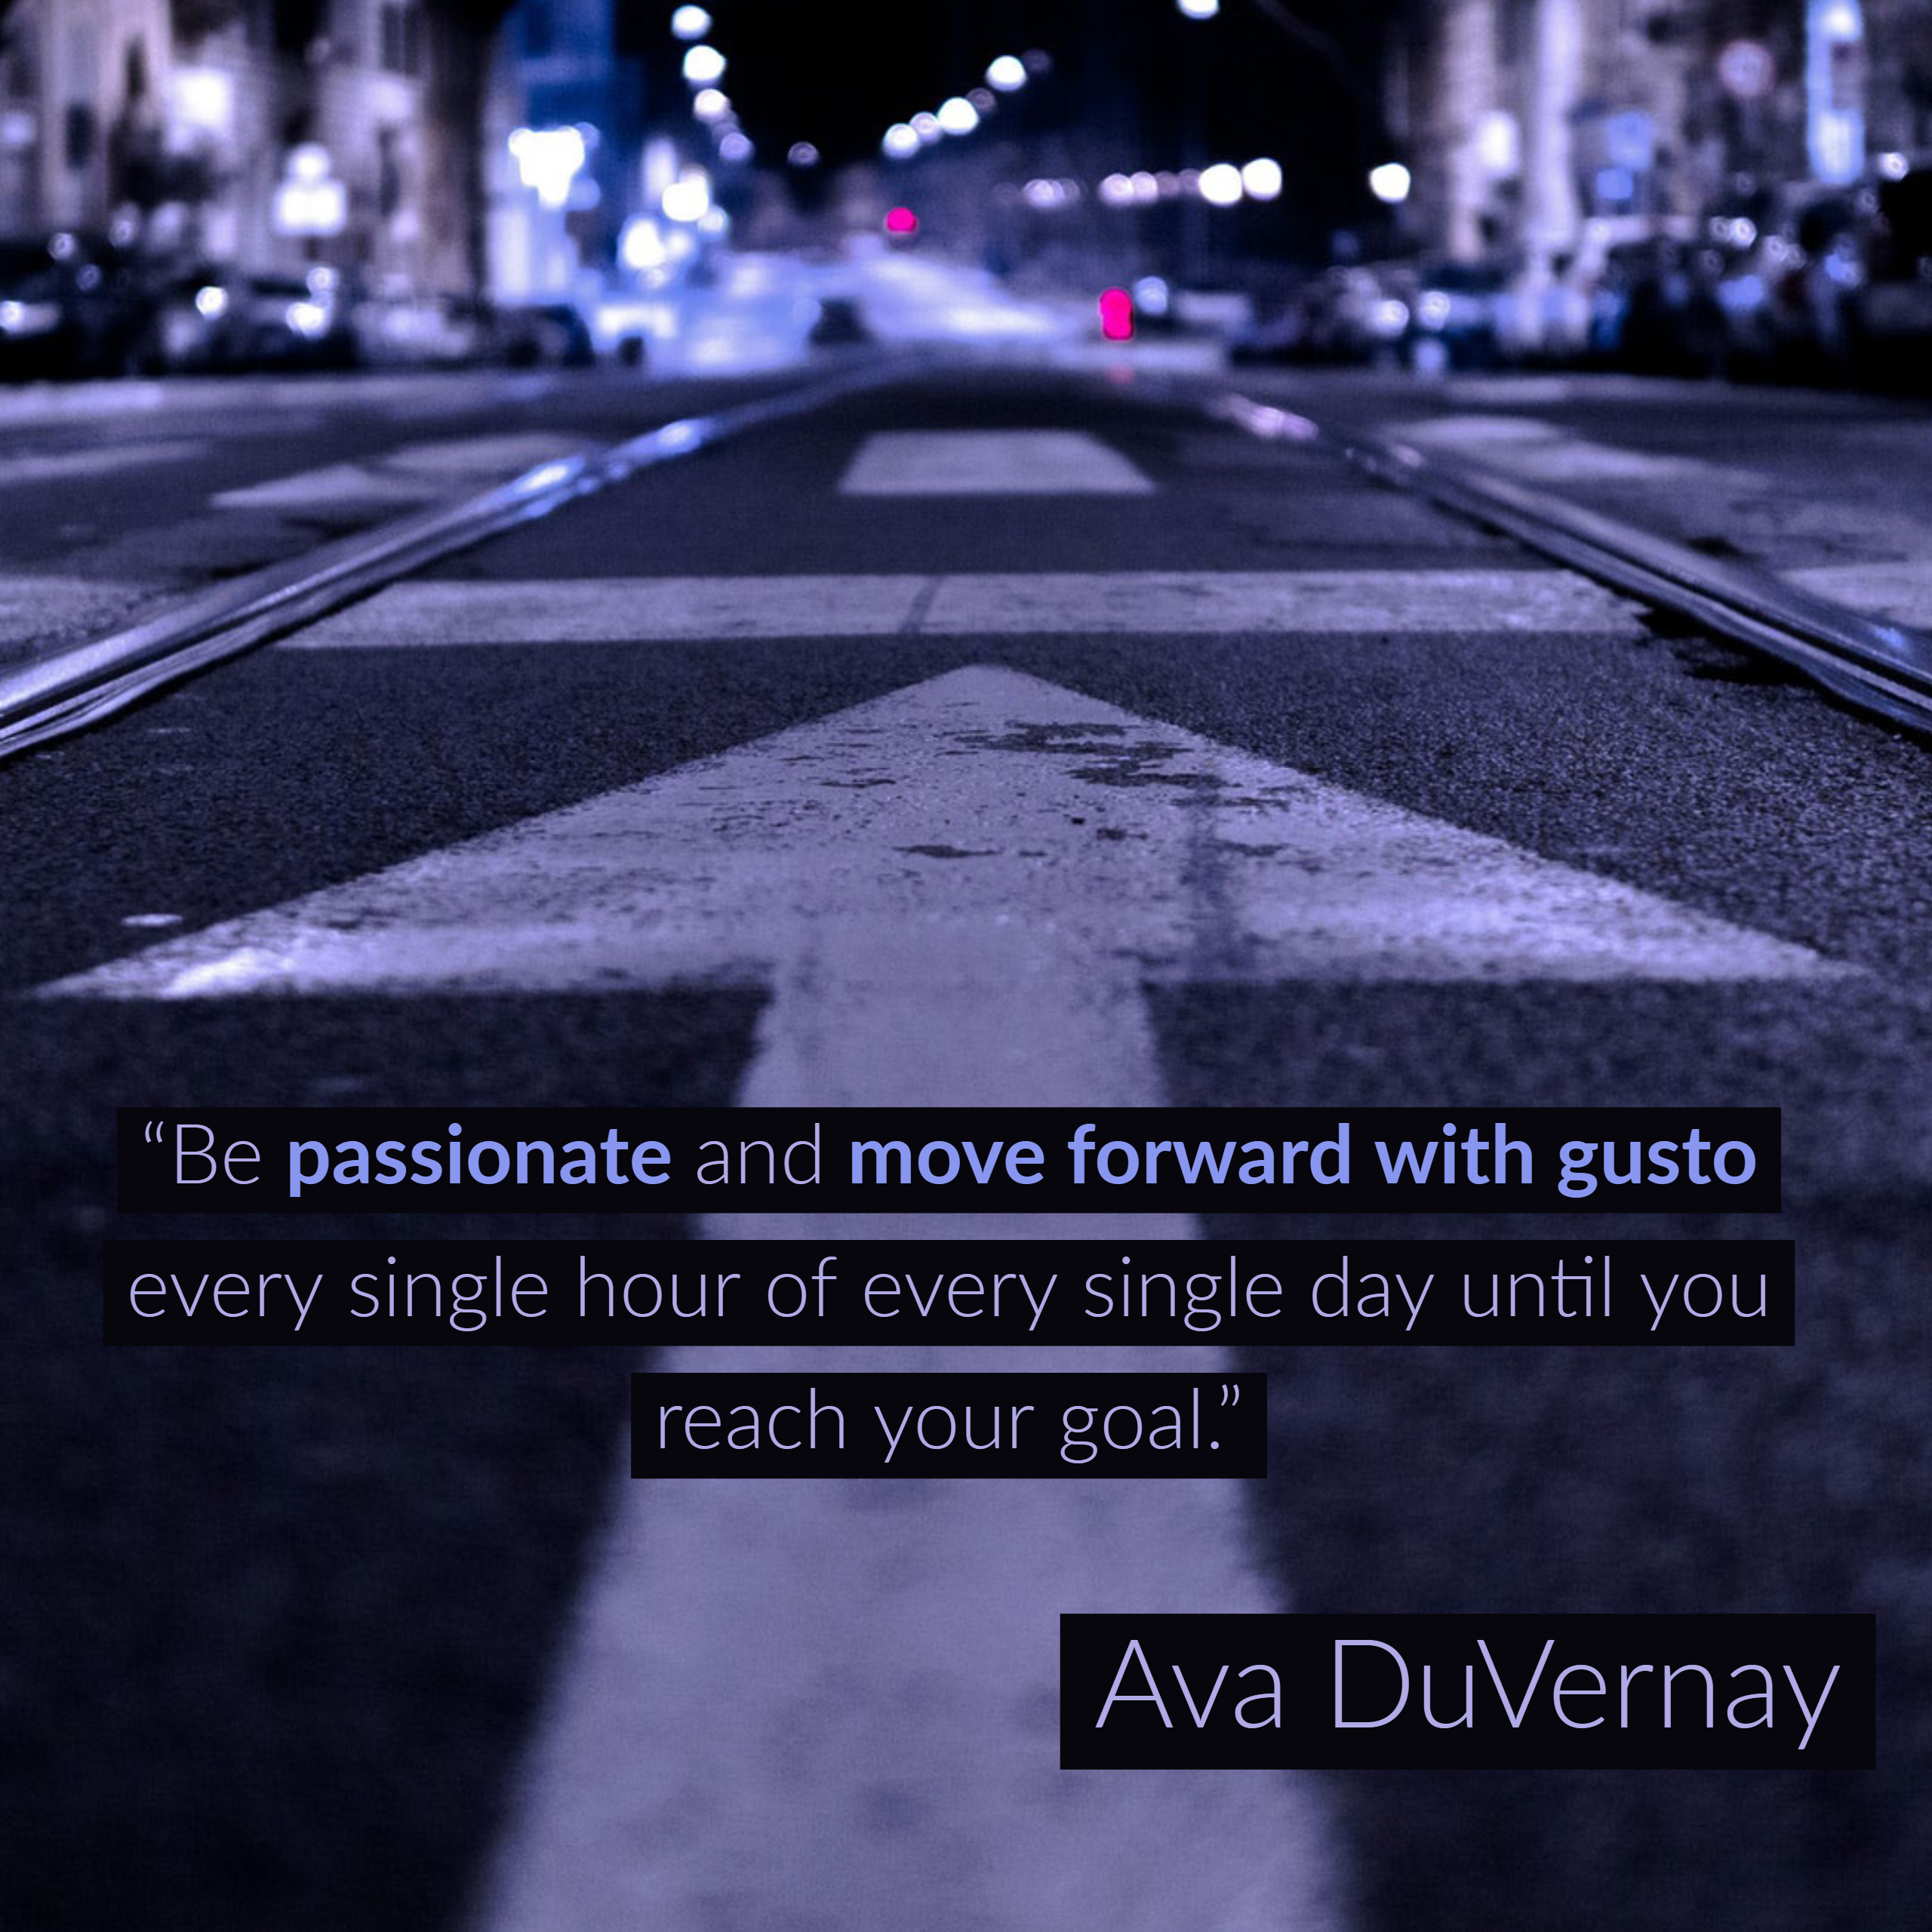 Be passionate and move forward with gusto every single hour of every single day until you reach your goal.